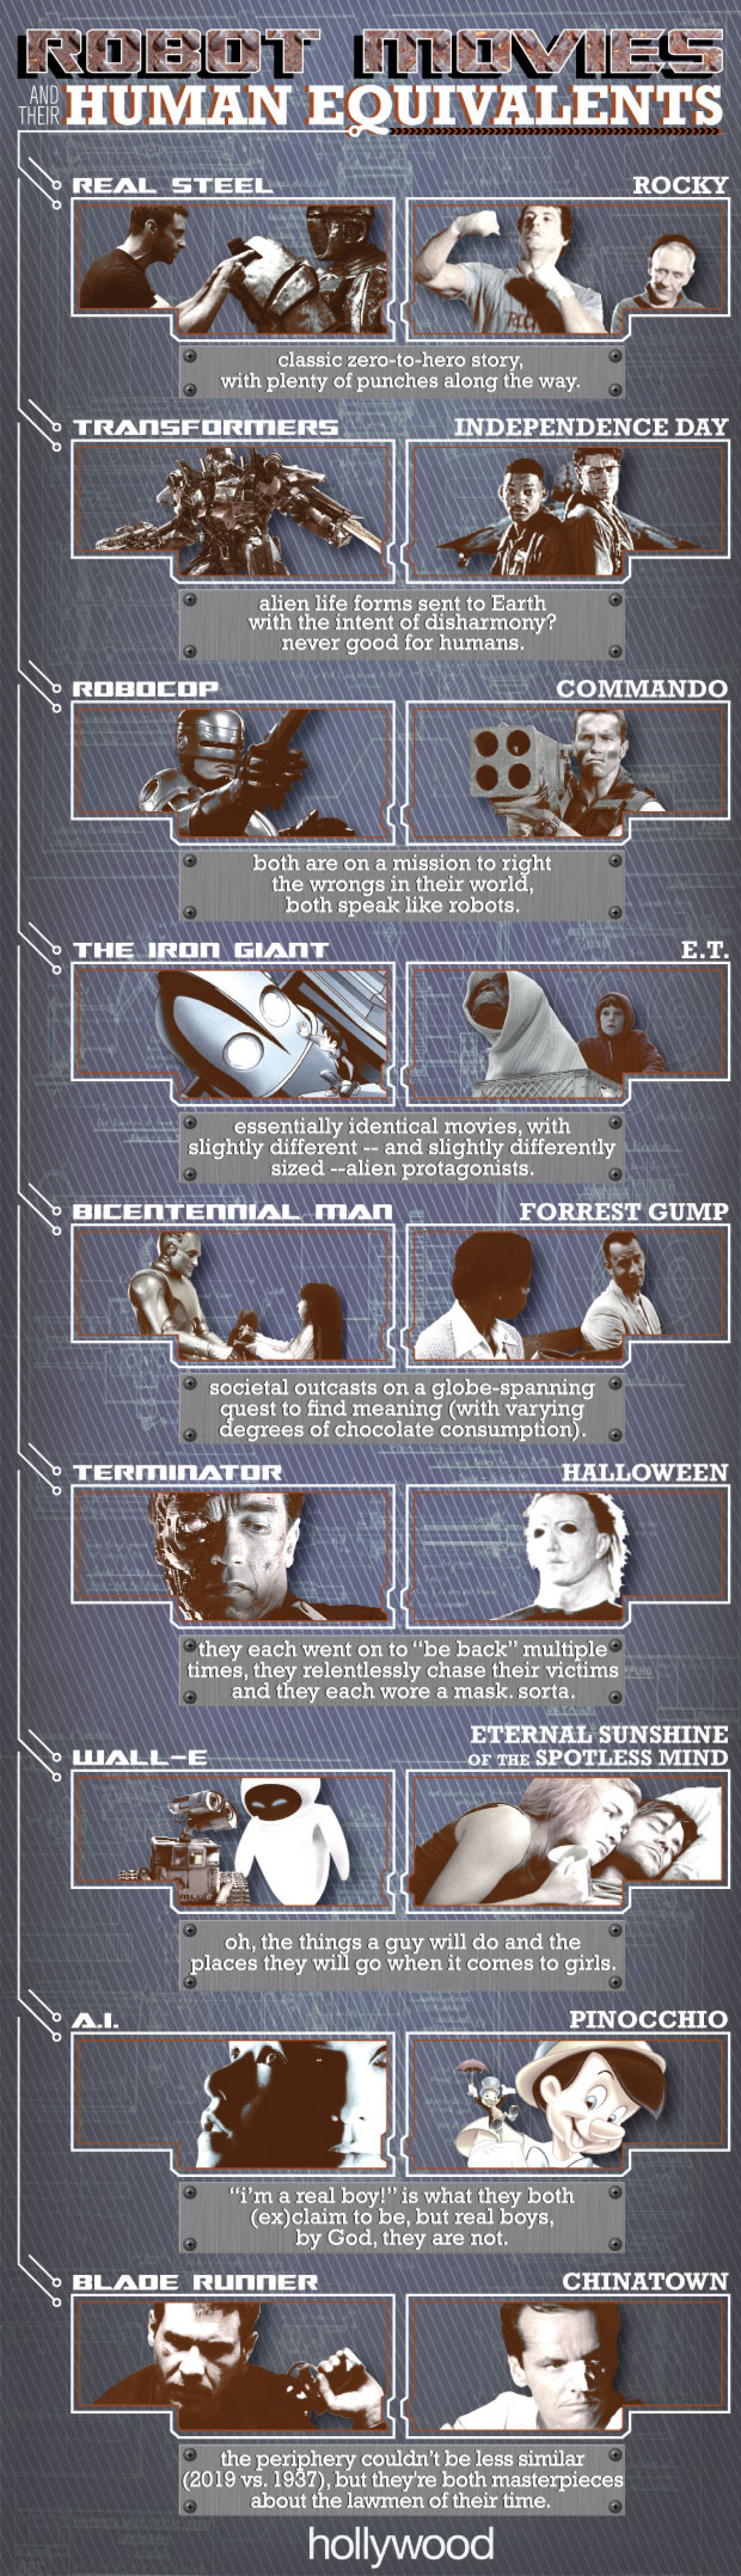 Robot Movies and Their Human Equivalents Infographic